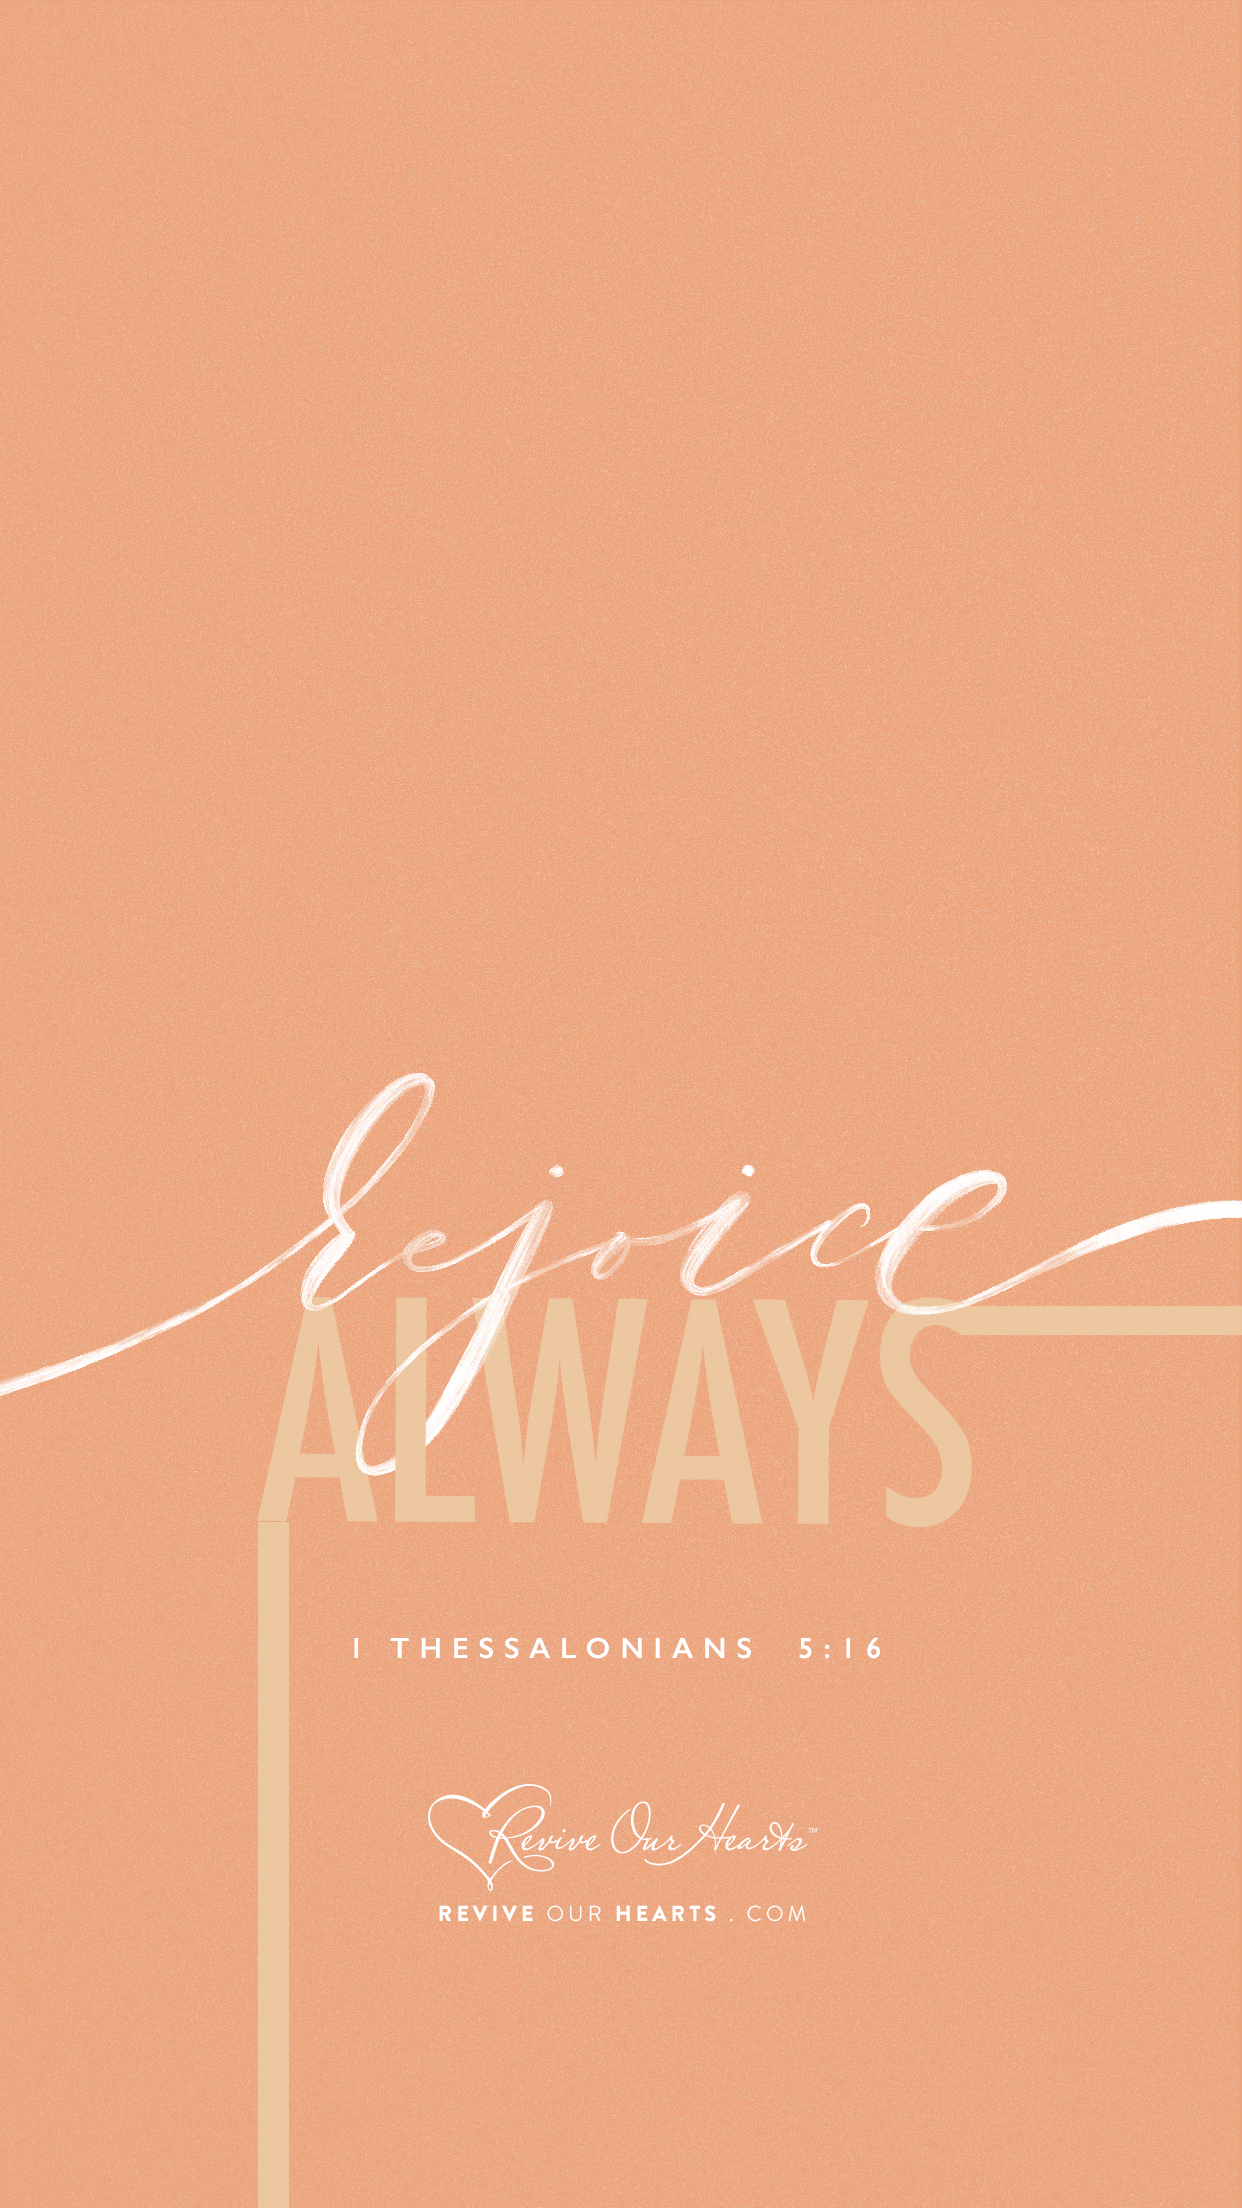 Rejoice Always. Wallpaper. Revive Our Hearts